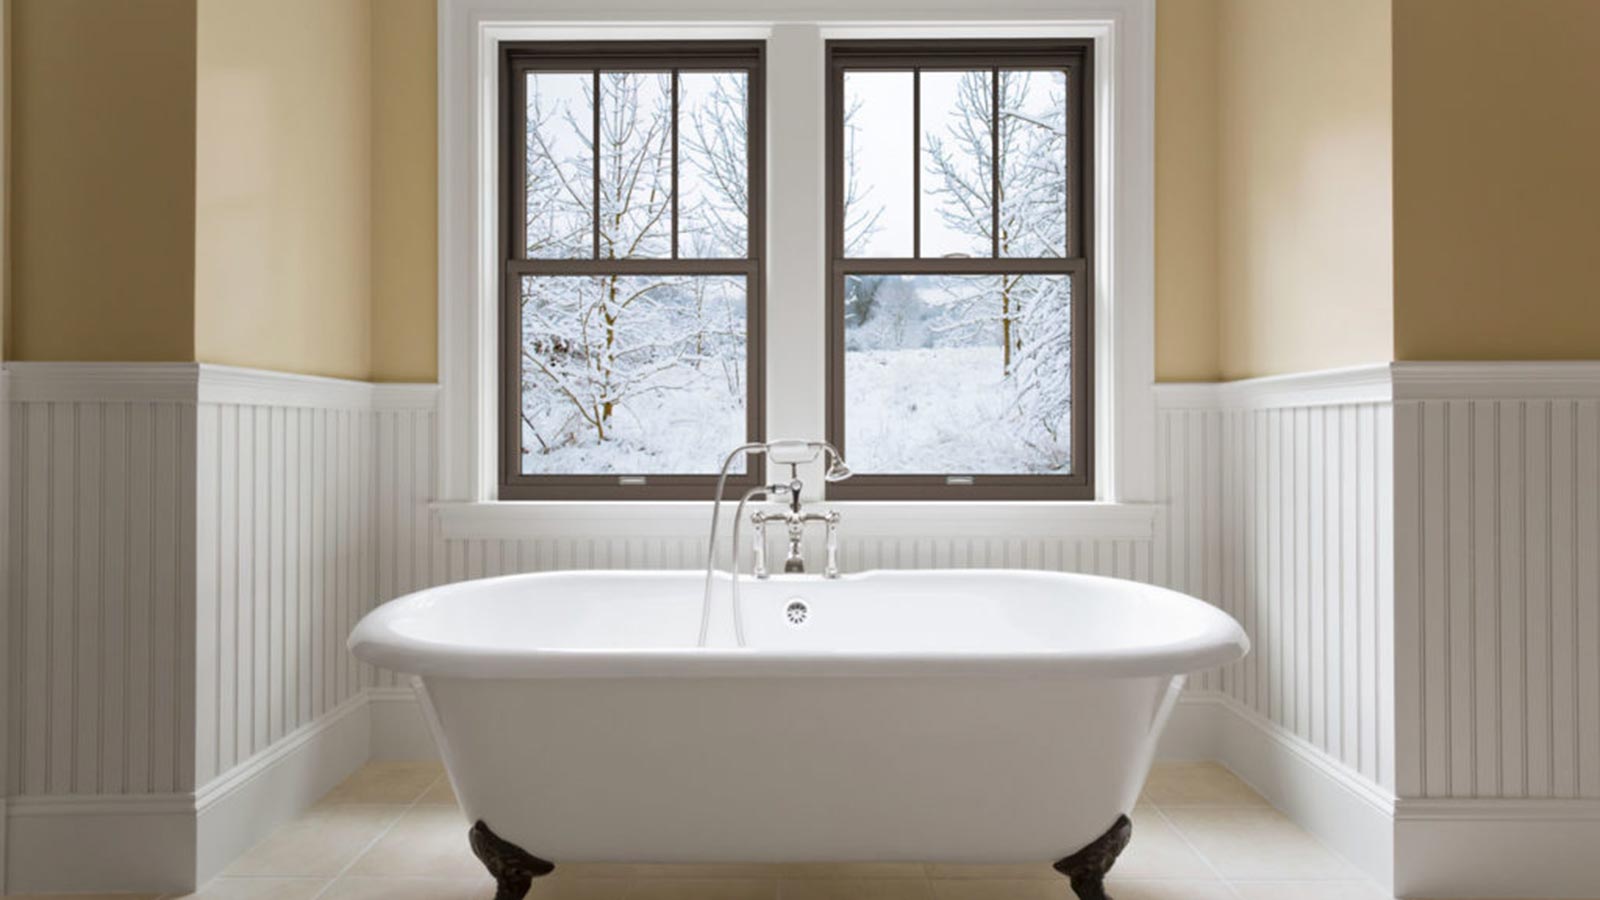 Claw-foot bathtub in front of large glass windows overlooking a snowy backyard